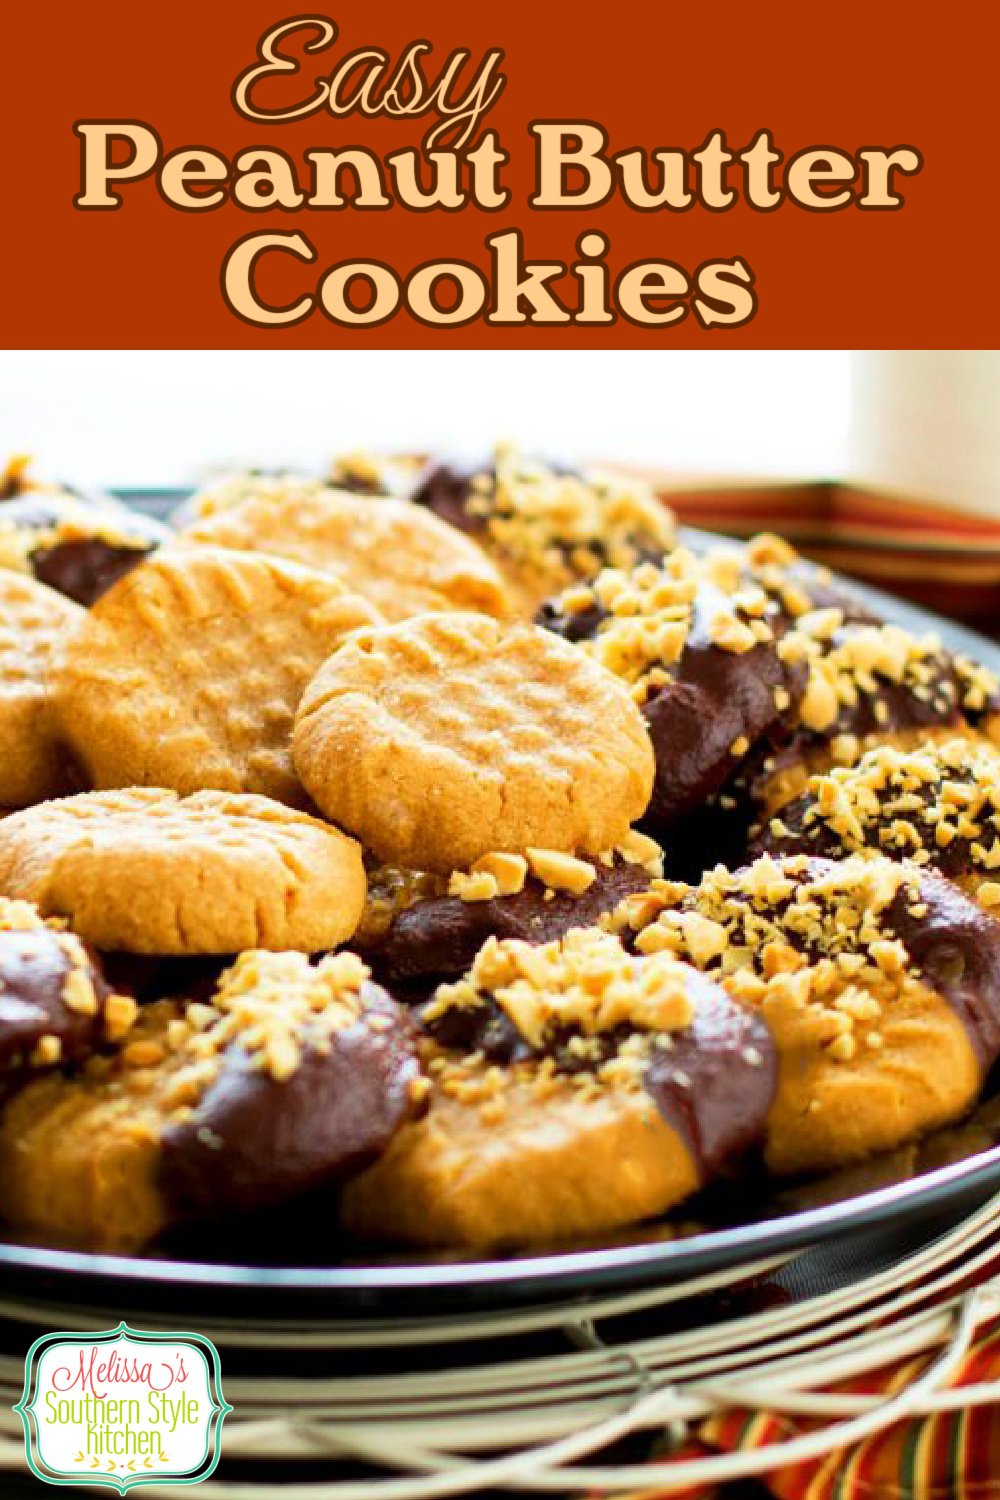 The world's best combo shines in these EASY Chocolate Dipped Peanut Butter Cookies #peanutbuttercookies #peanutbutter #cookierecipes #cookies #peanuts #chocolate #desserts #holidaybaking #holidays #easyrecipes #dessertfoodrecipes #southernfood #southernrecipes